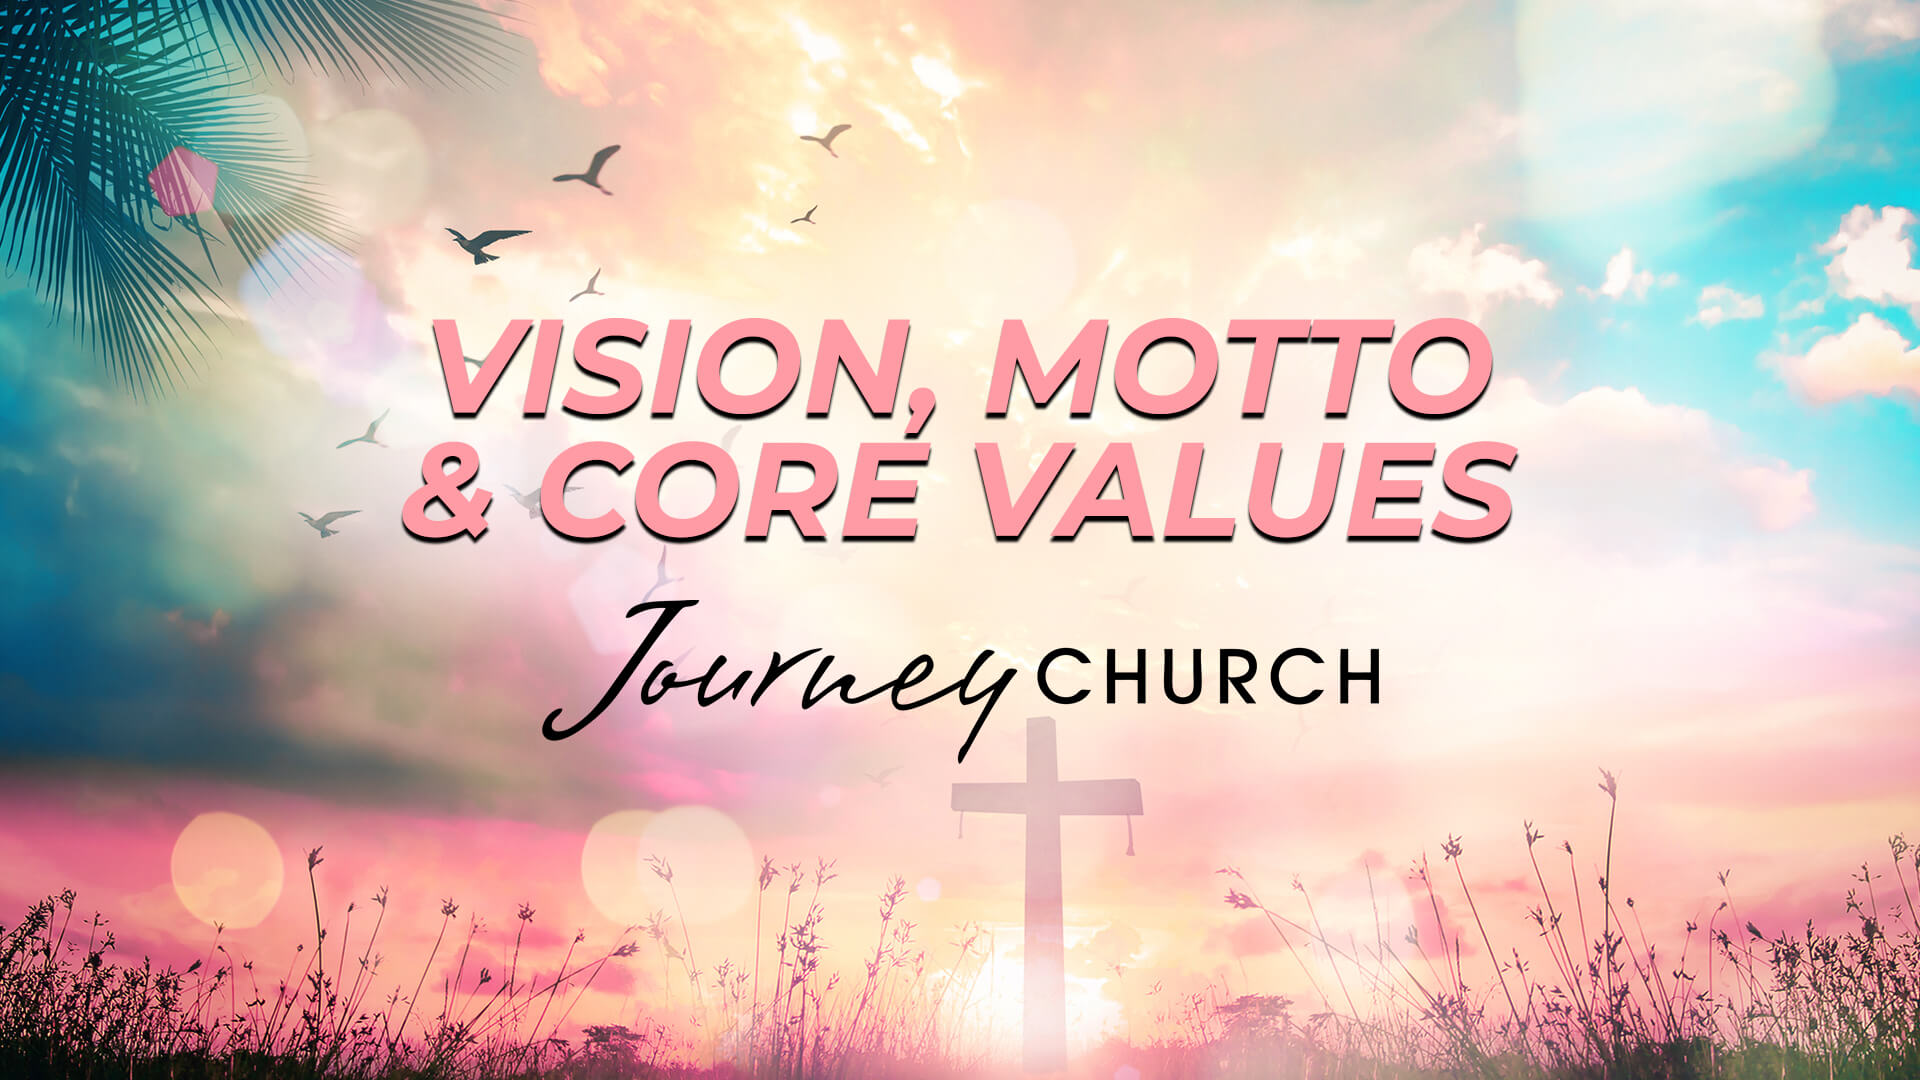 Journey Church Vision Motto and Core Values